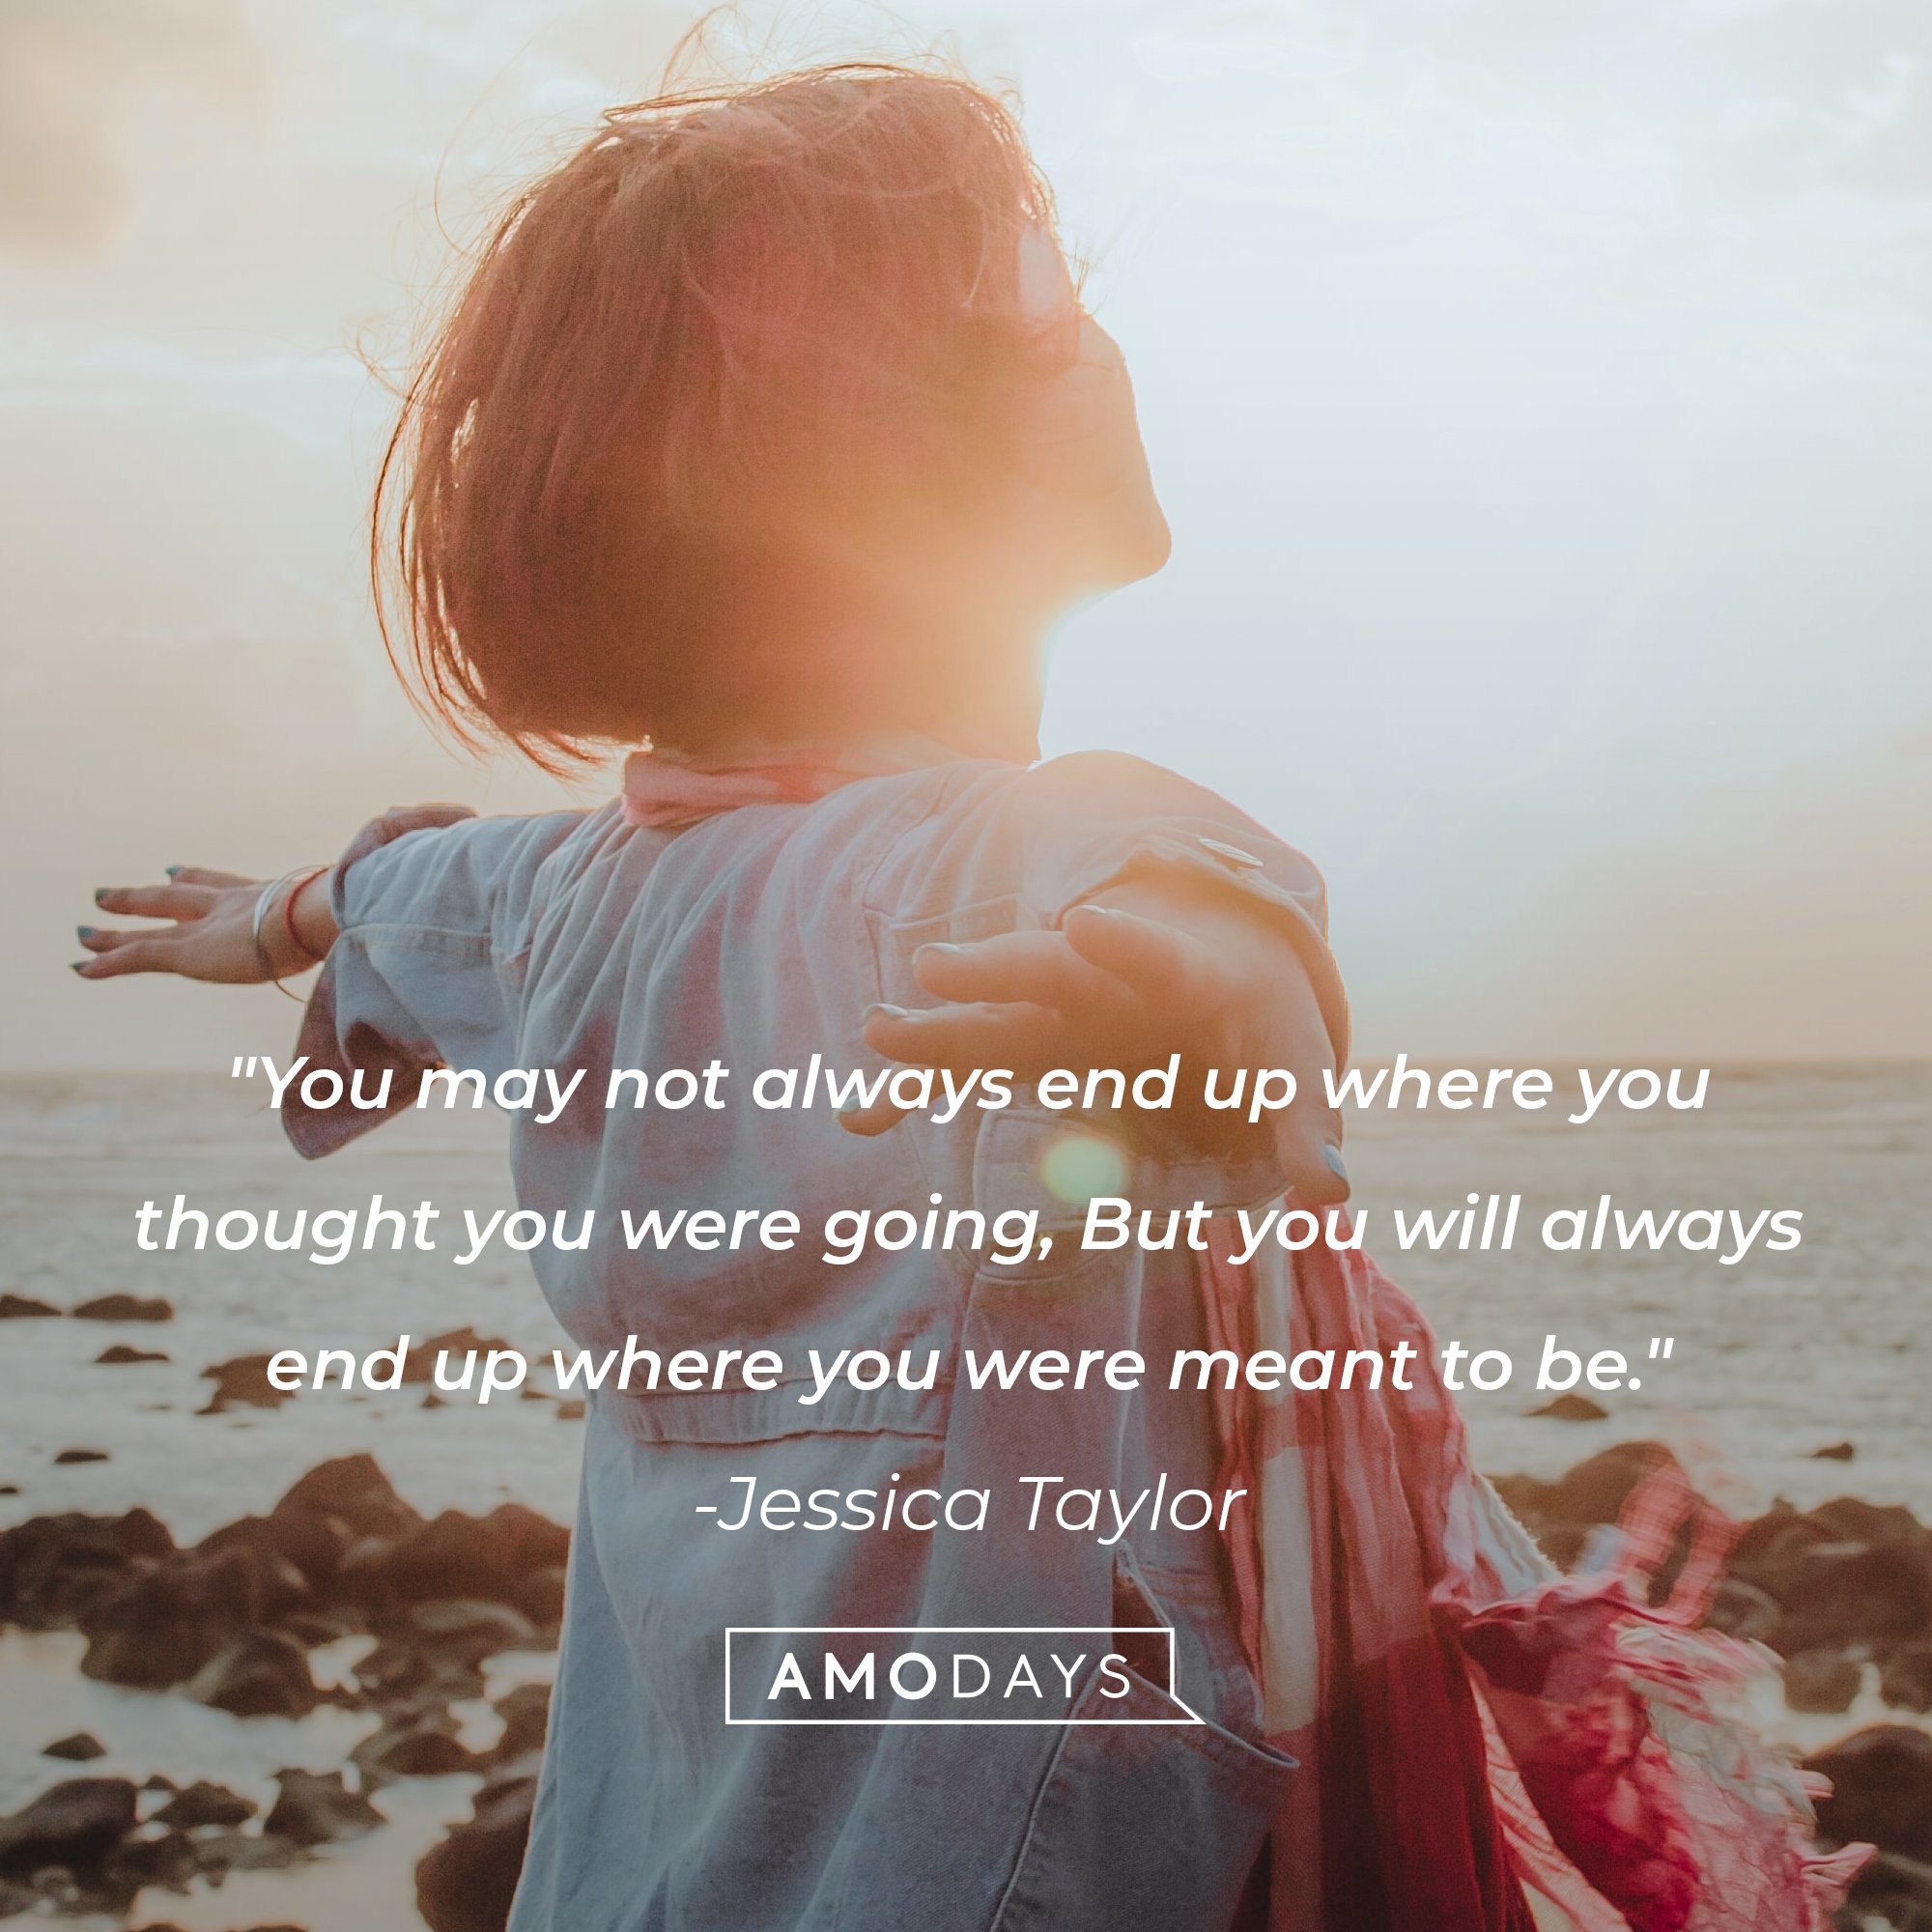 Jessica Taylor’s quote: "You may not always end up where you thought you were going, But you will always end up where you were meant to be."  | Image: AmoDays 